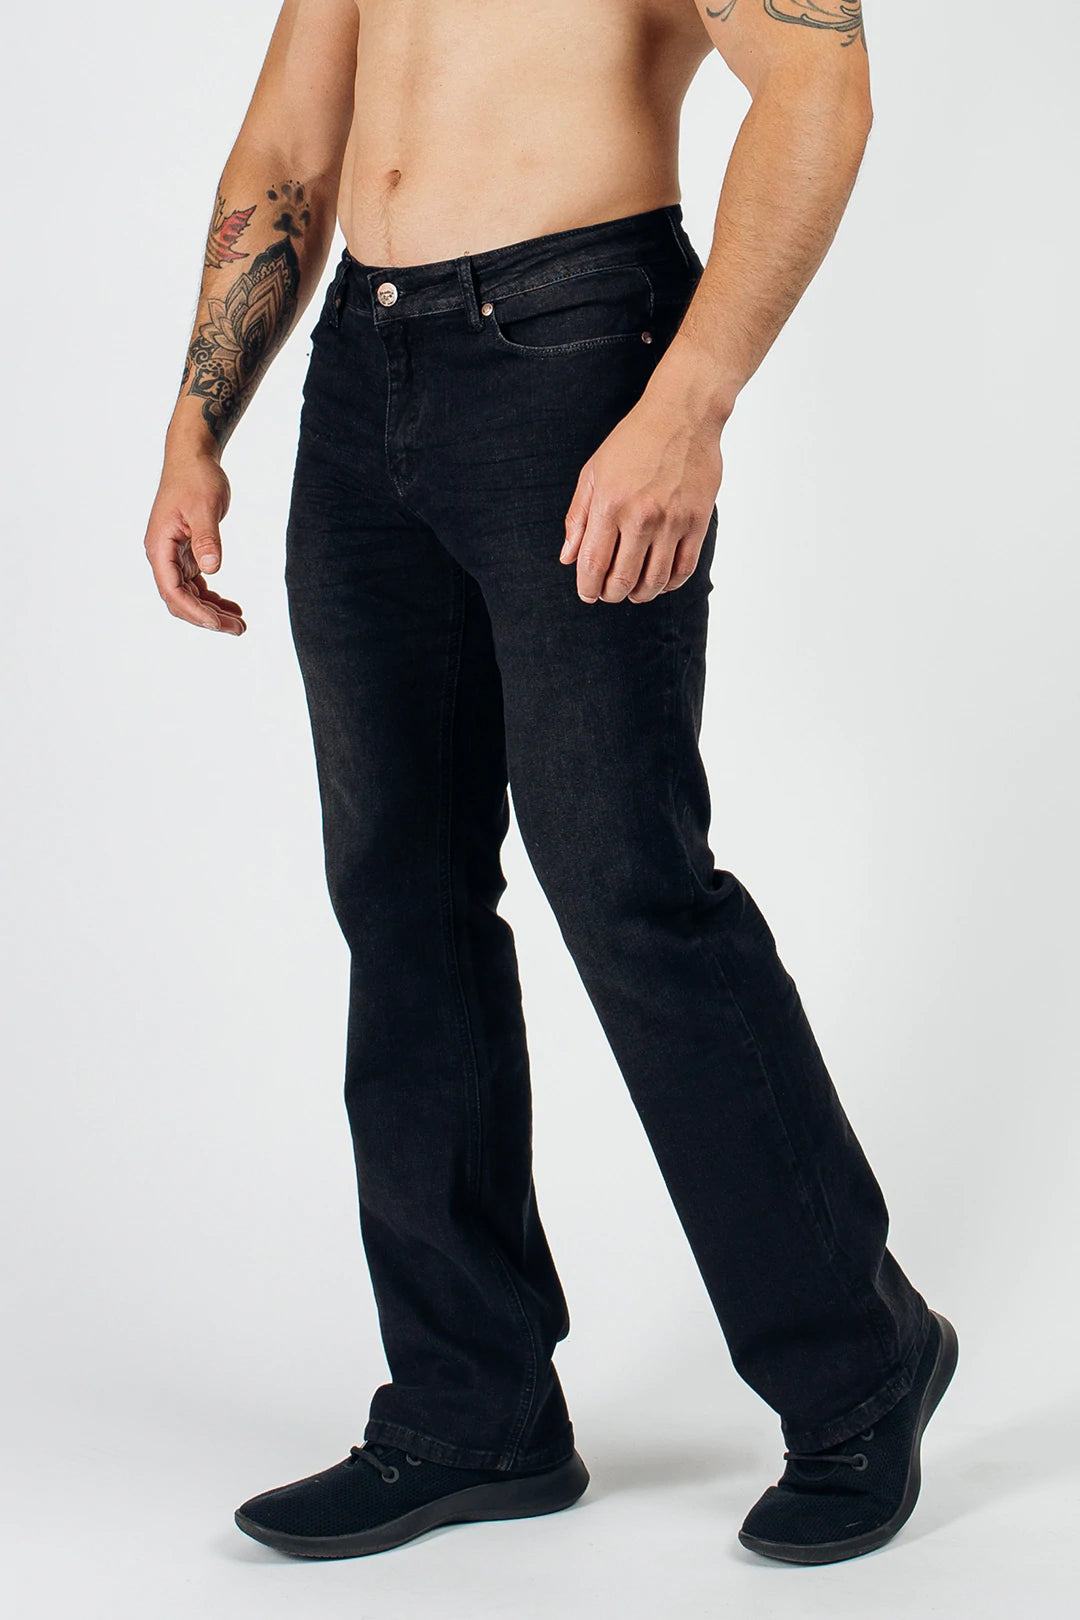 Navy Athletic Fit Jeans - Bluejay